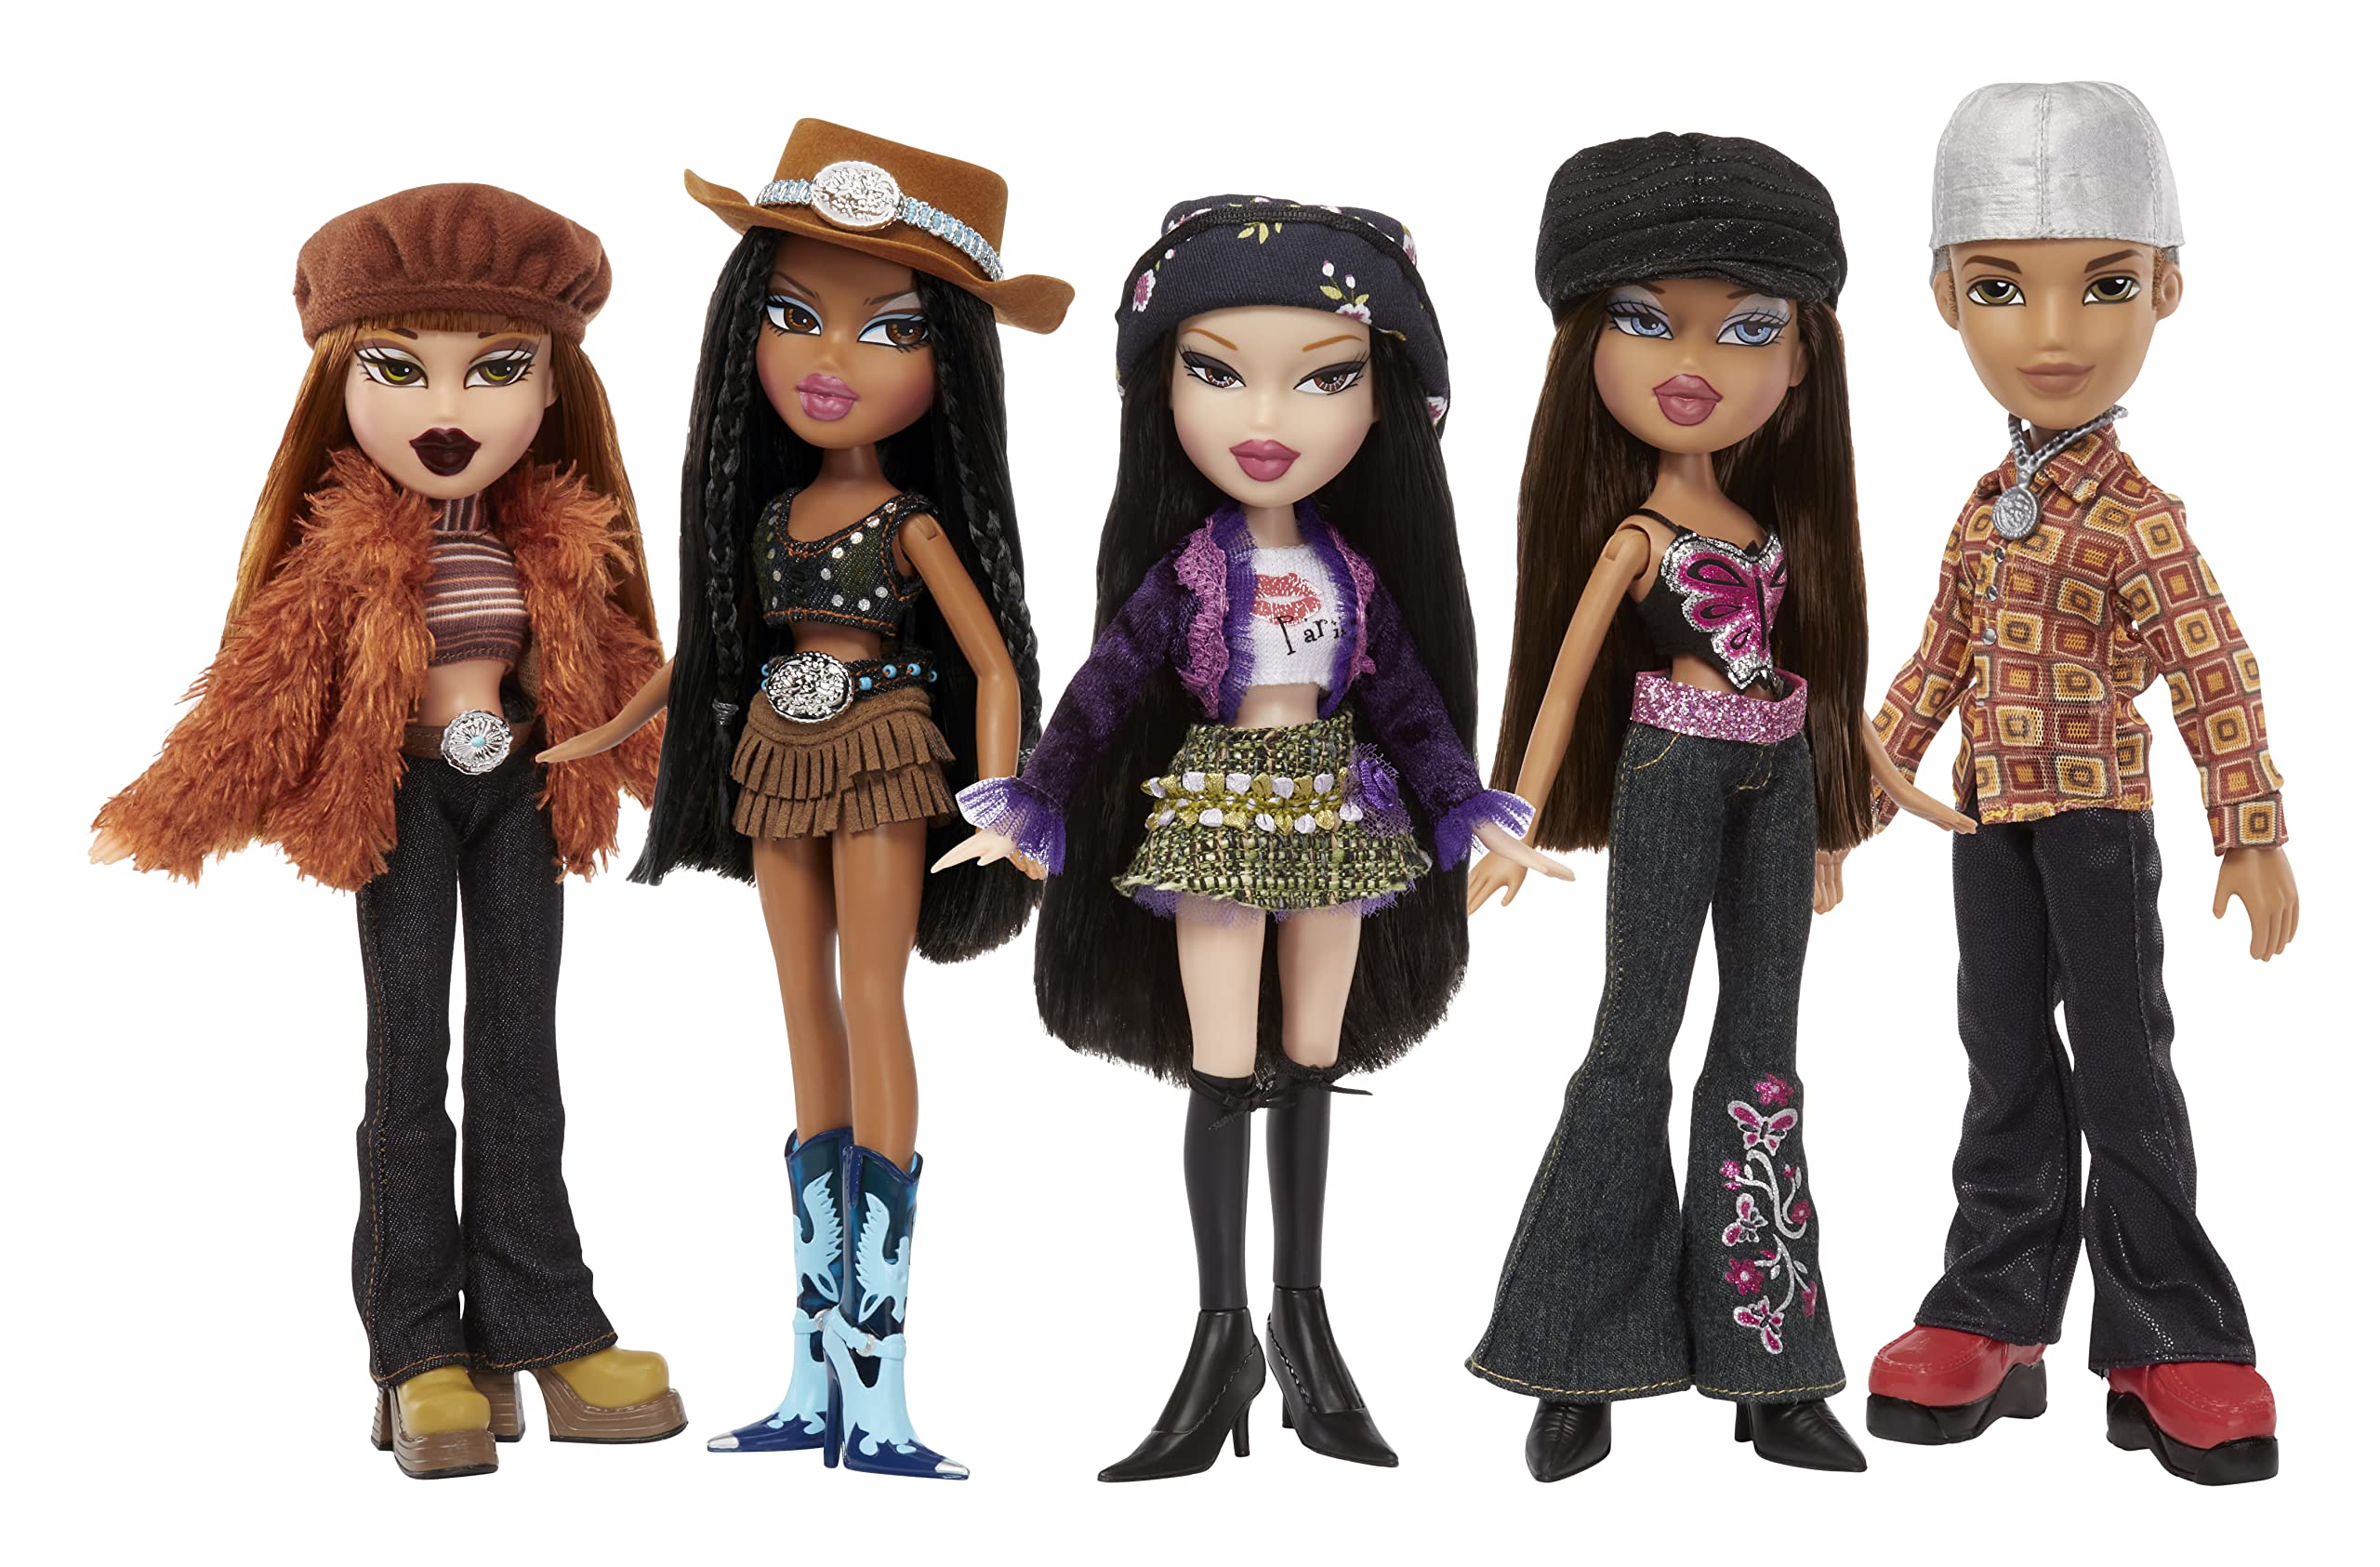 Bratz Original Fashion Doll Meygan with 2 Outfits and Poster (Pack of 1)